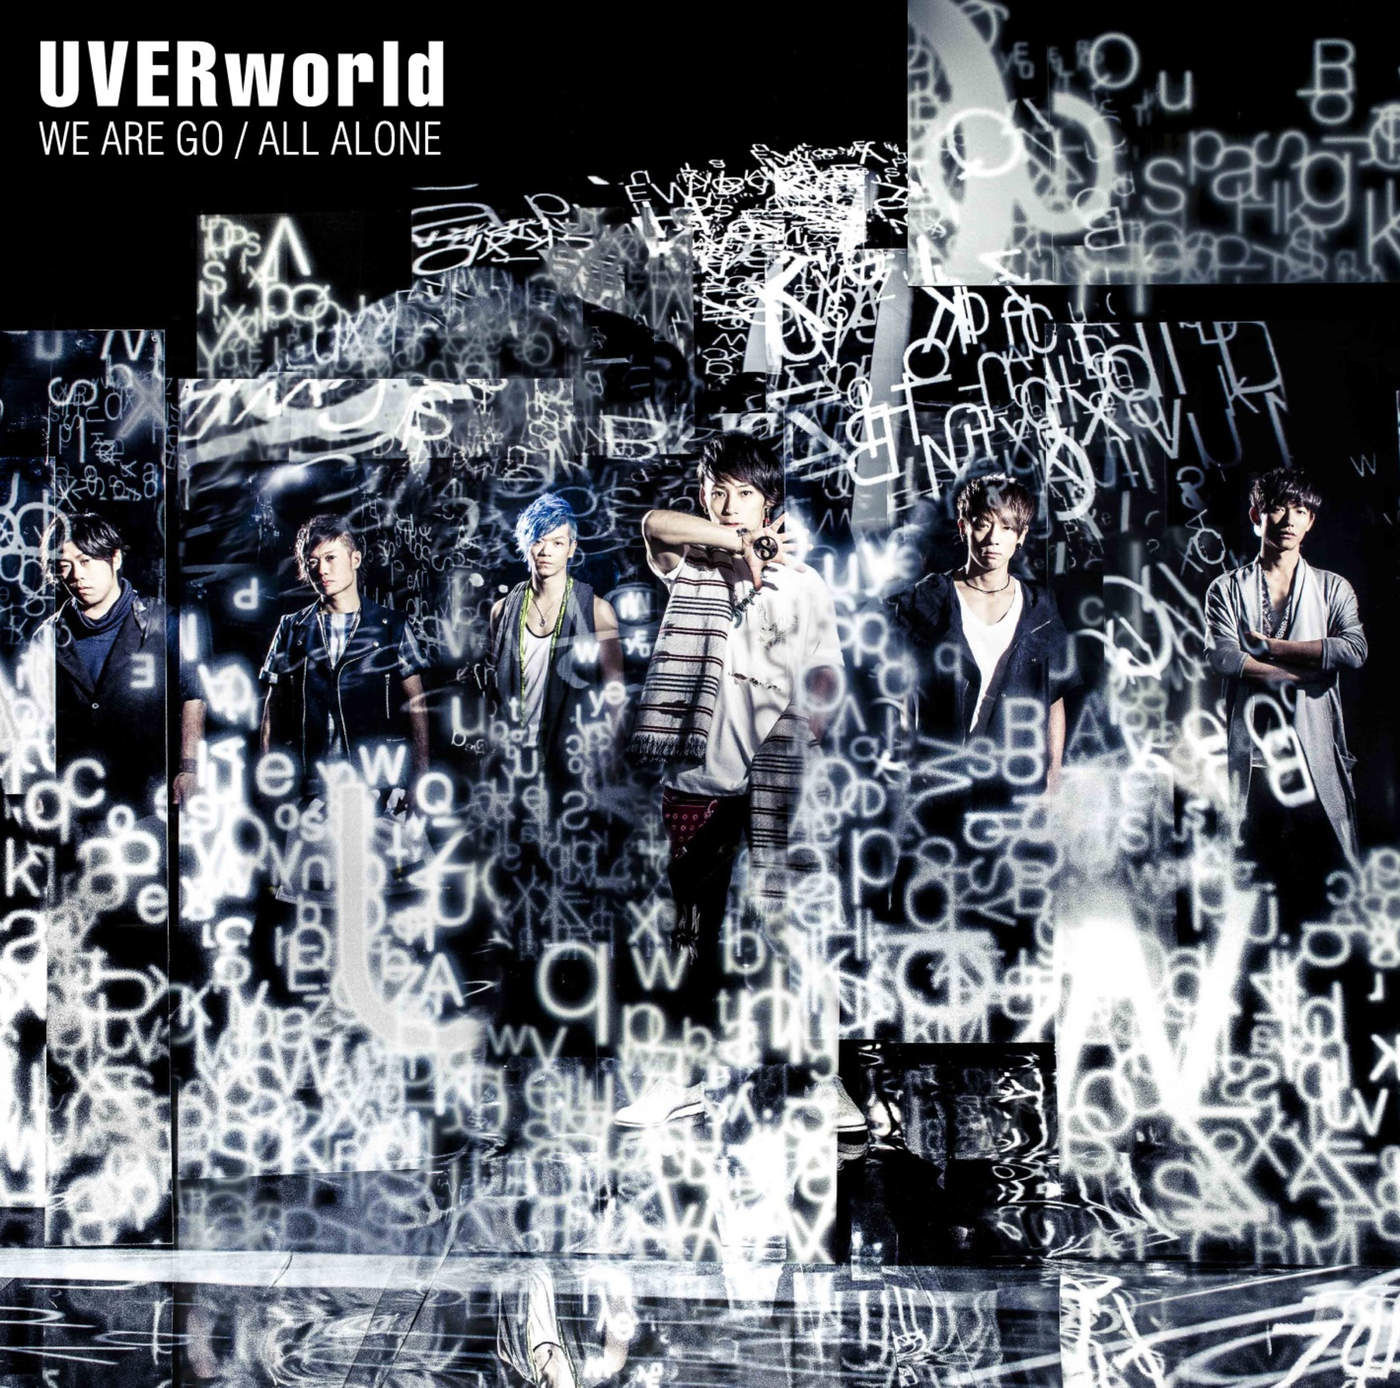 [7 27 Release!] UVERworld - WE ARE GO